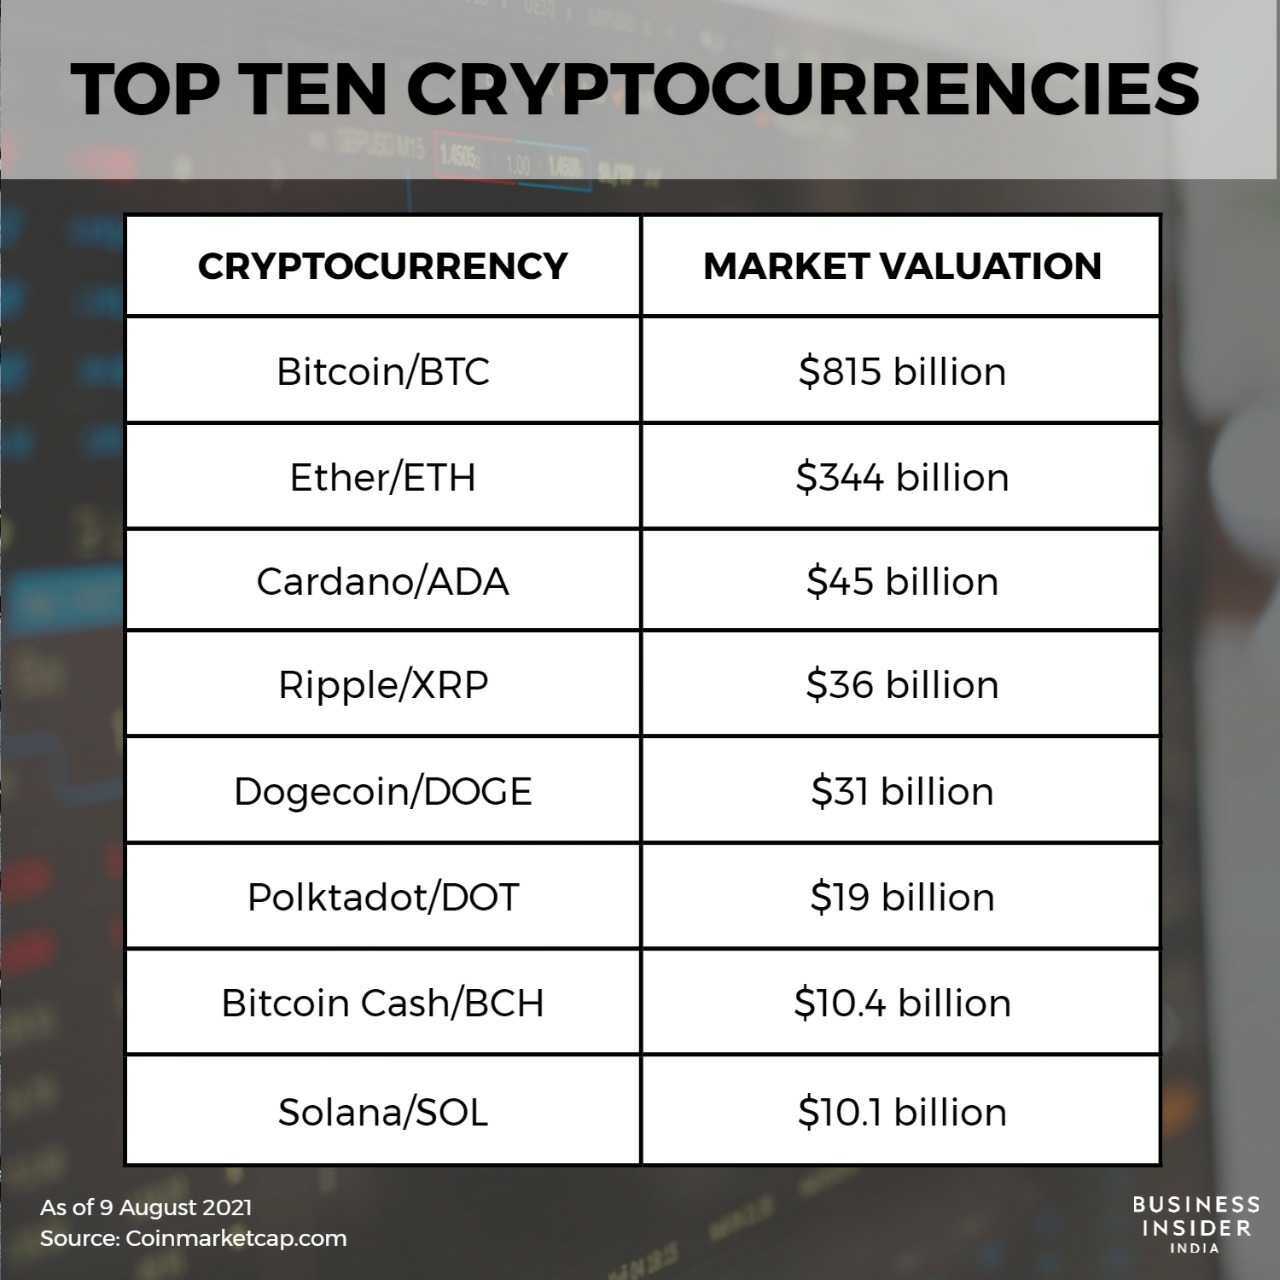 Coinranking | Top 50 Cryptocurrencies Ranked by Market Cap